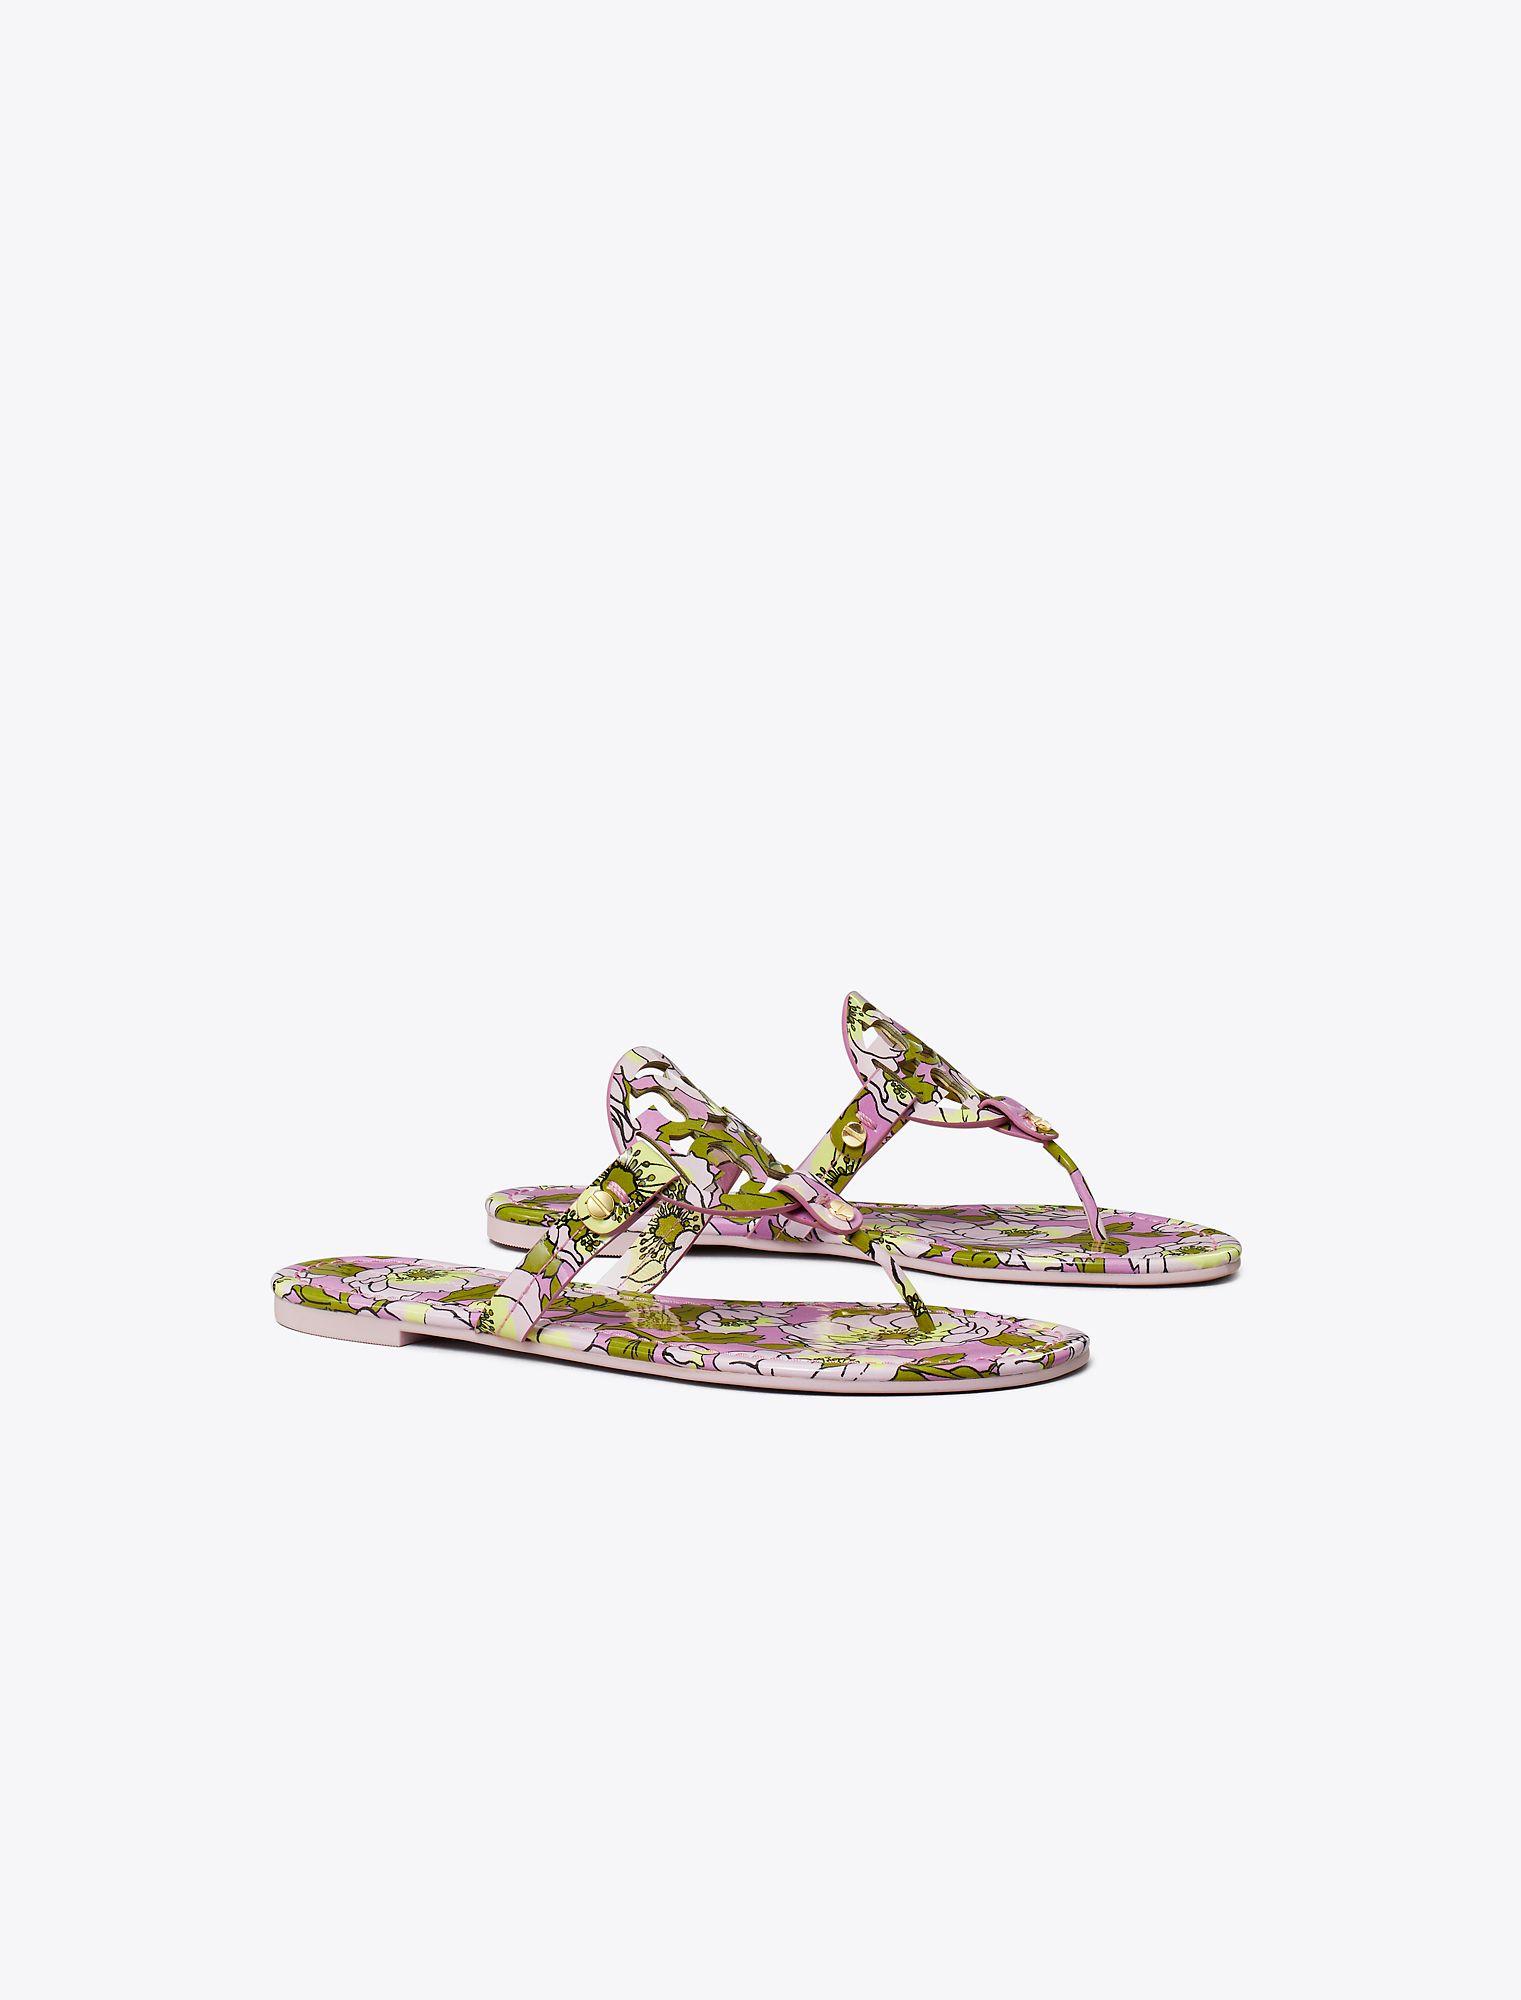 Tory Burch Miller Printed Patent Sandal in White | Lyst